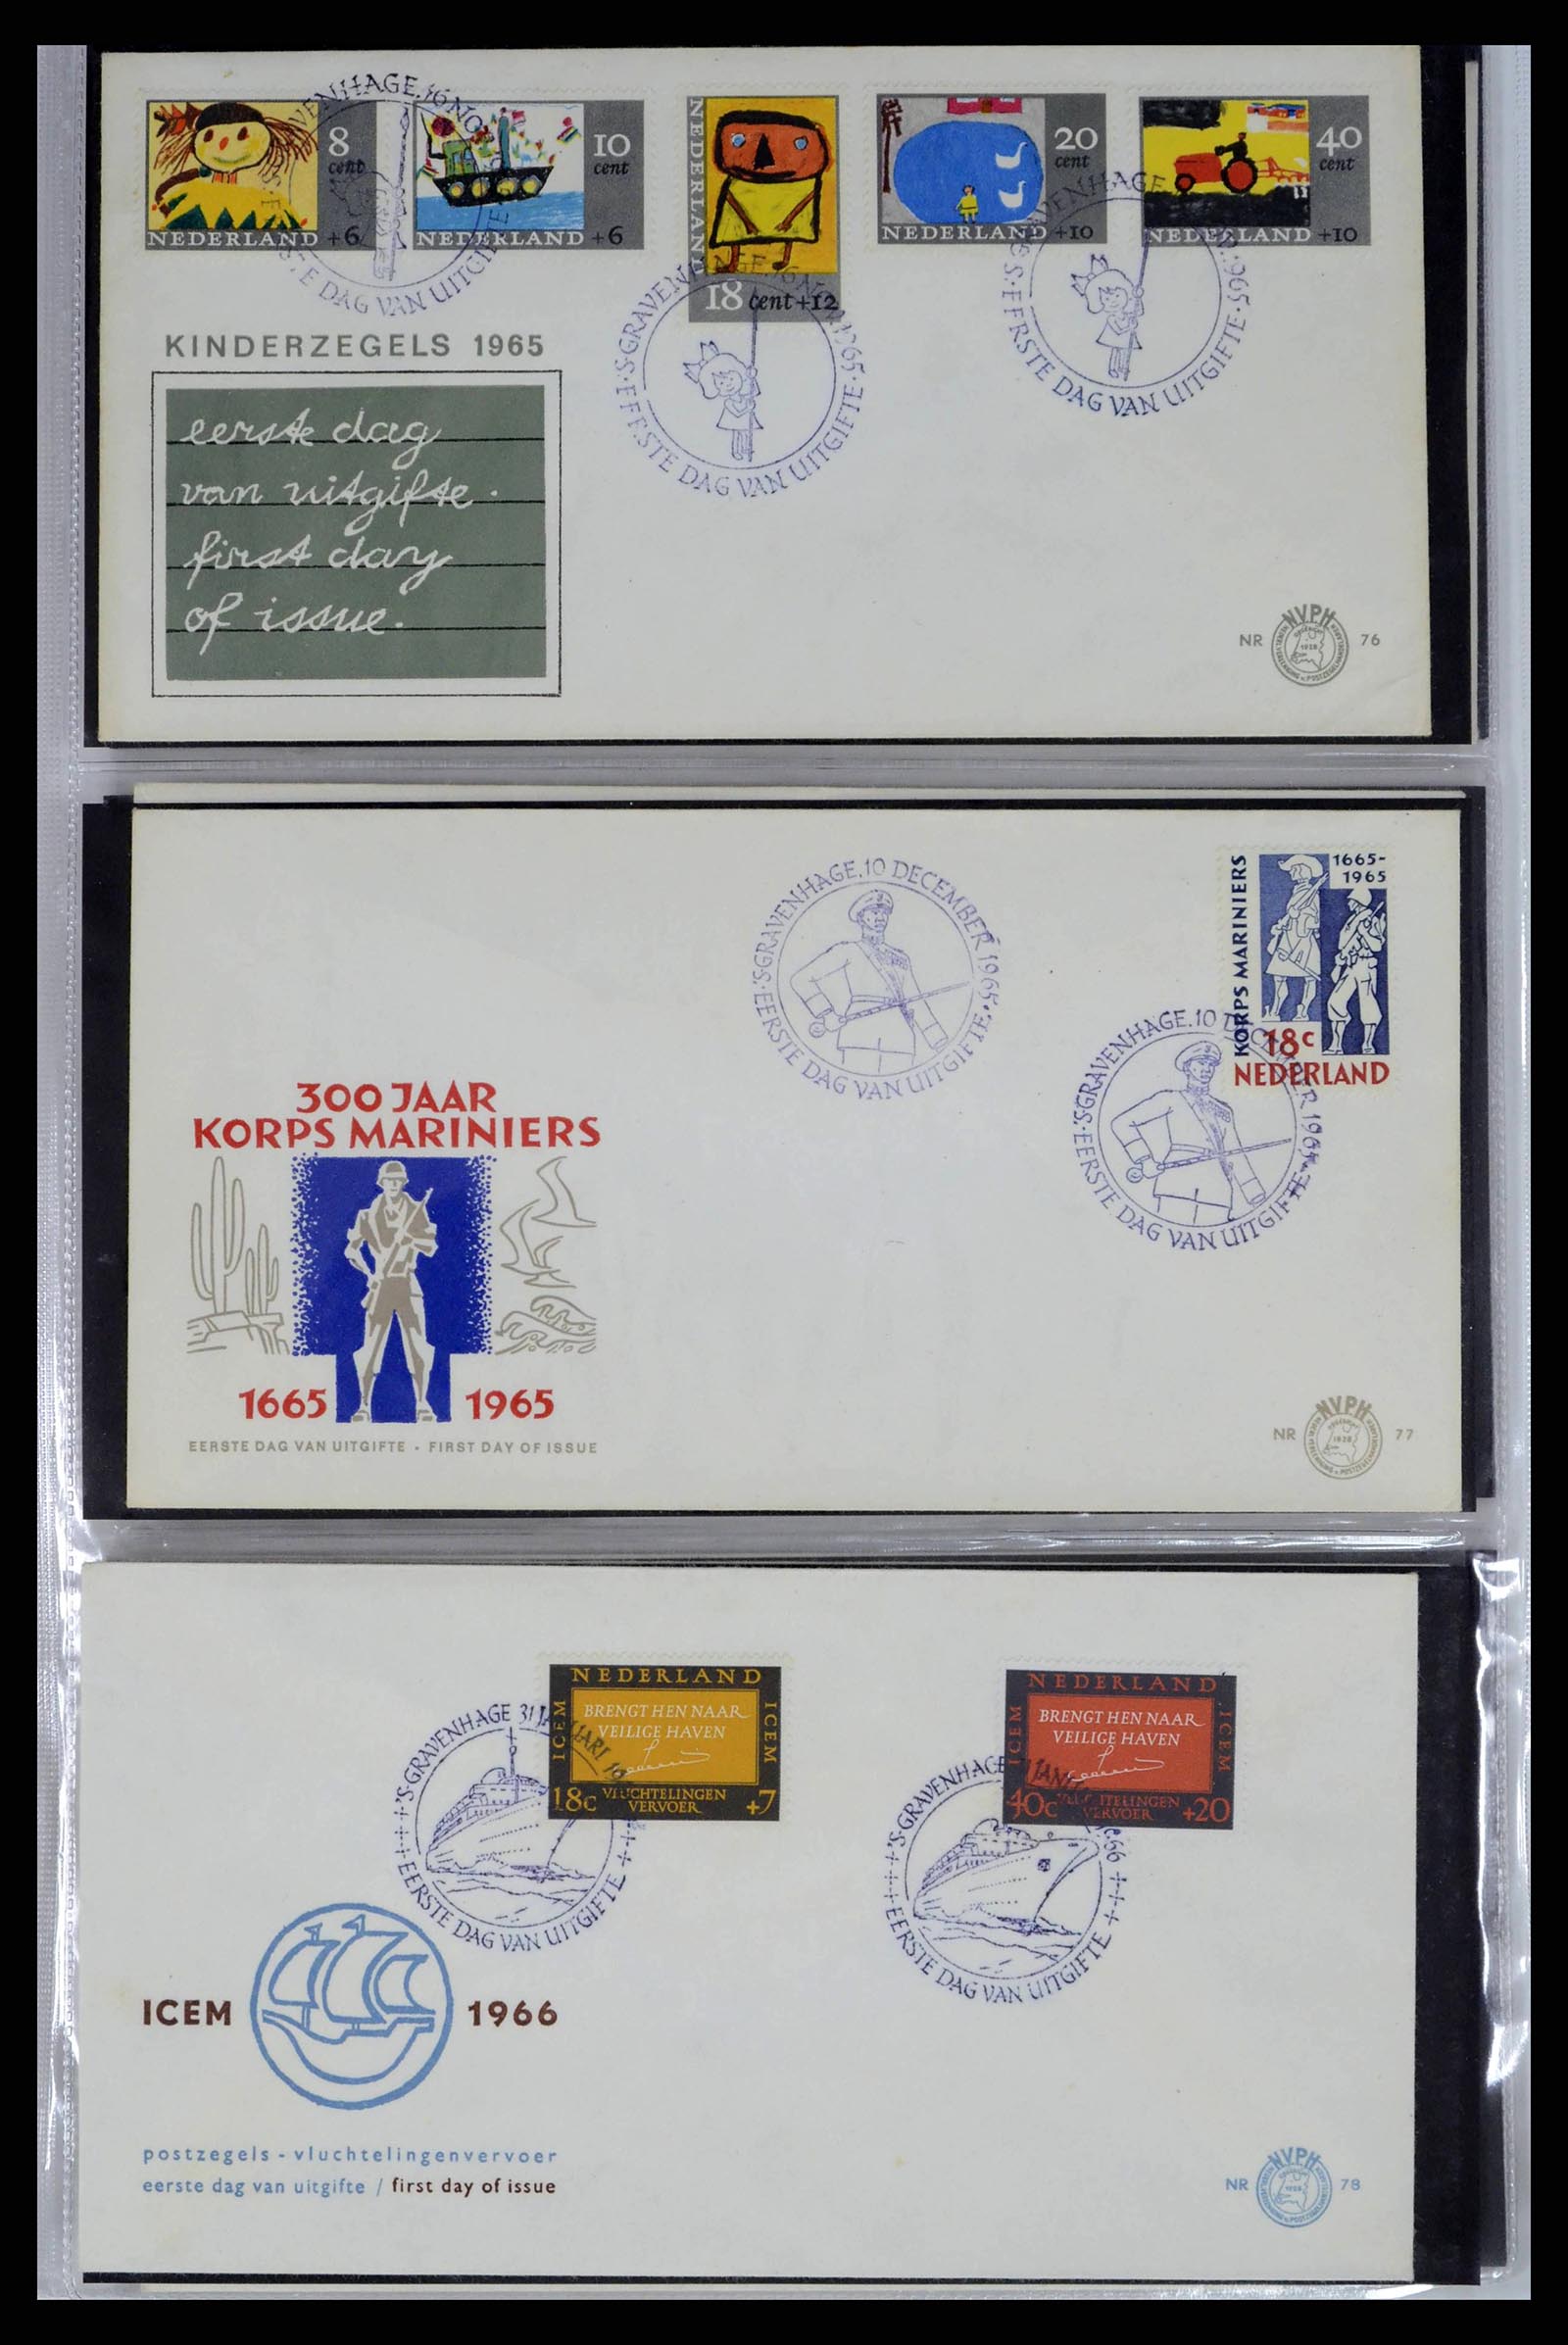 38271 0026 - Stamp collection 38271 Netherlands FDC's 1950-1995.